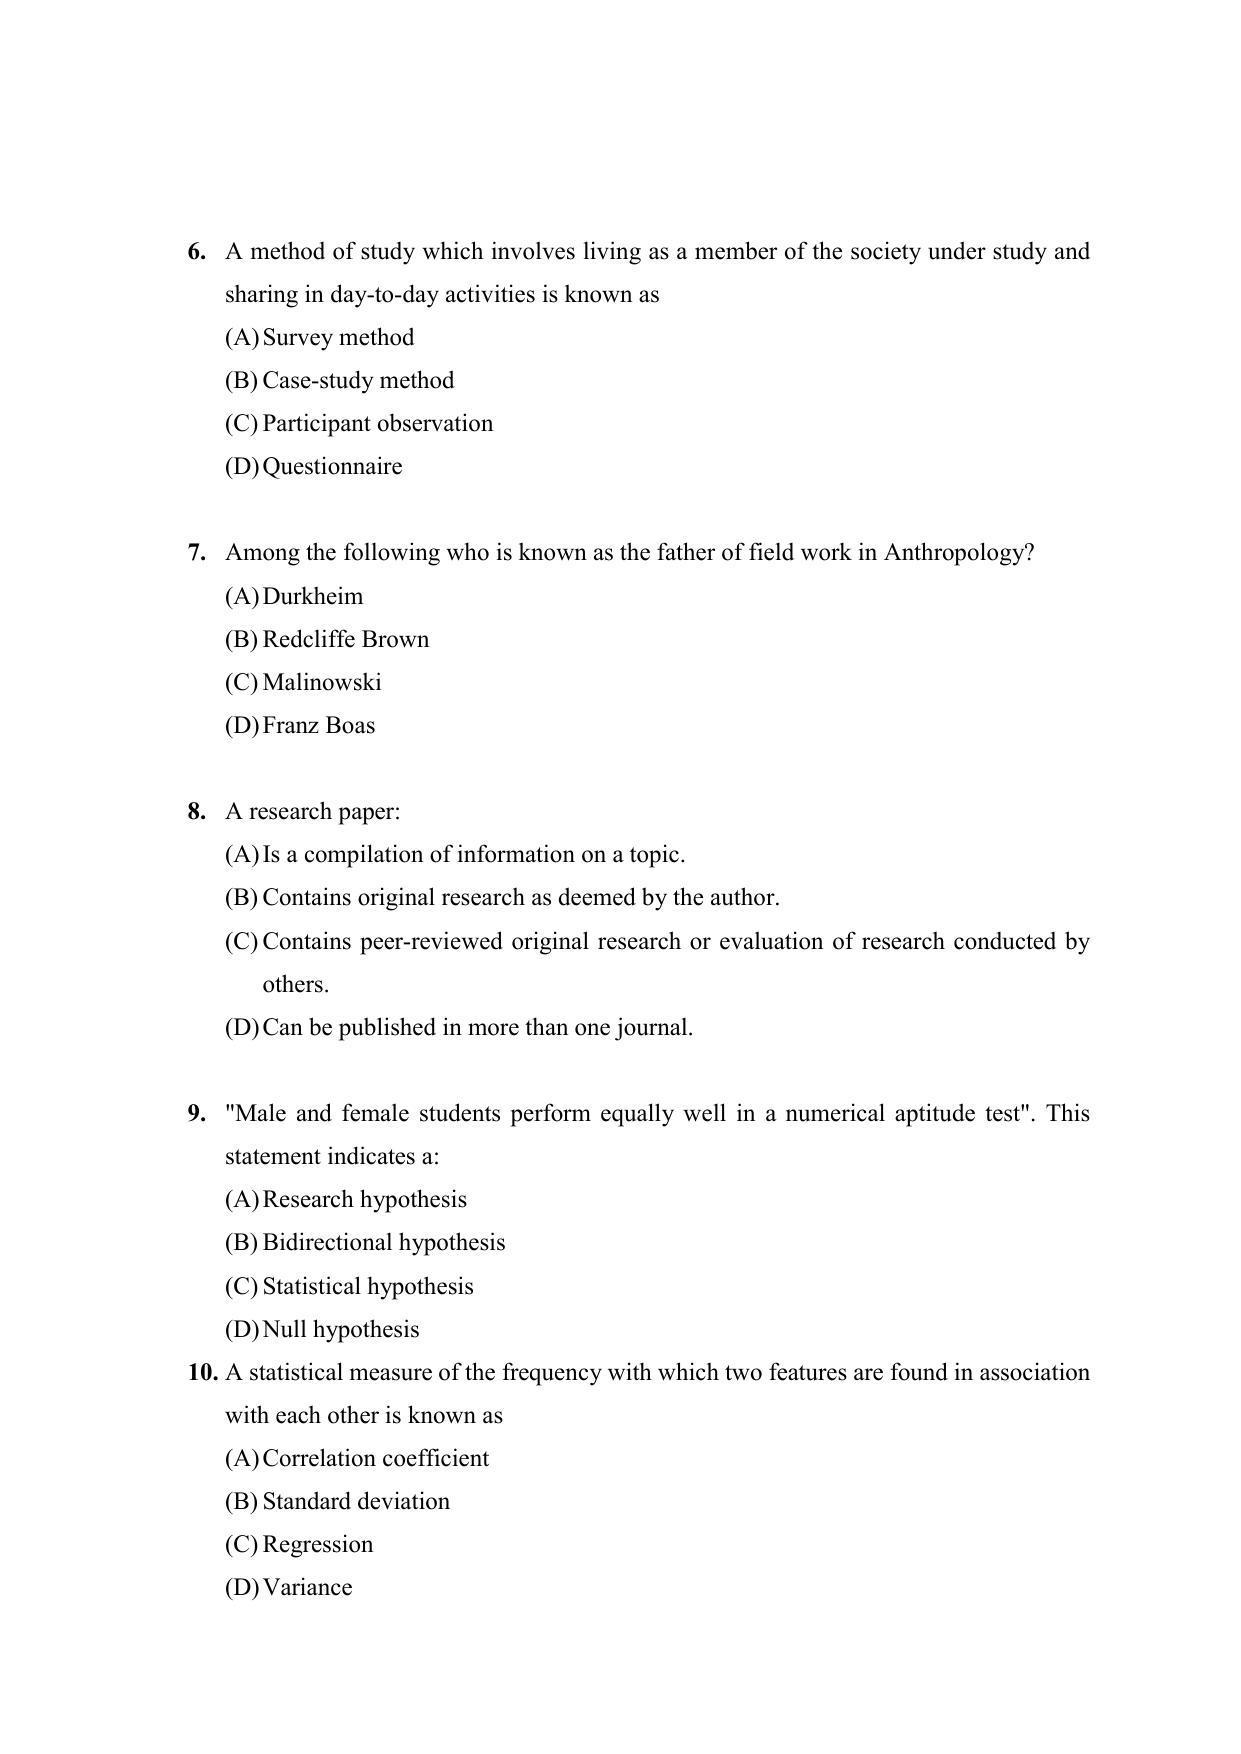 PU MPET Anthropology 2022 Question Papers - Page 2